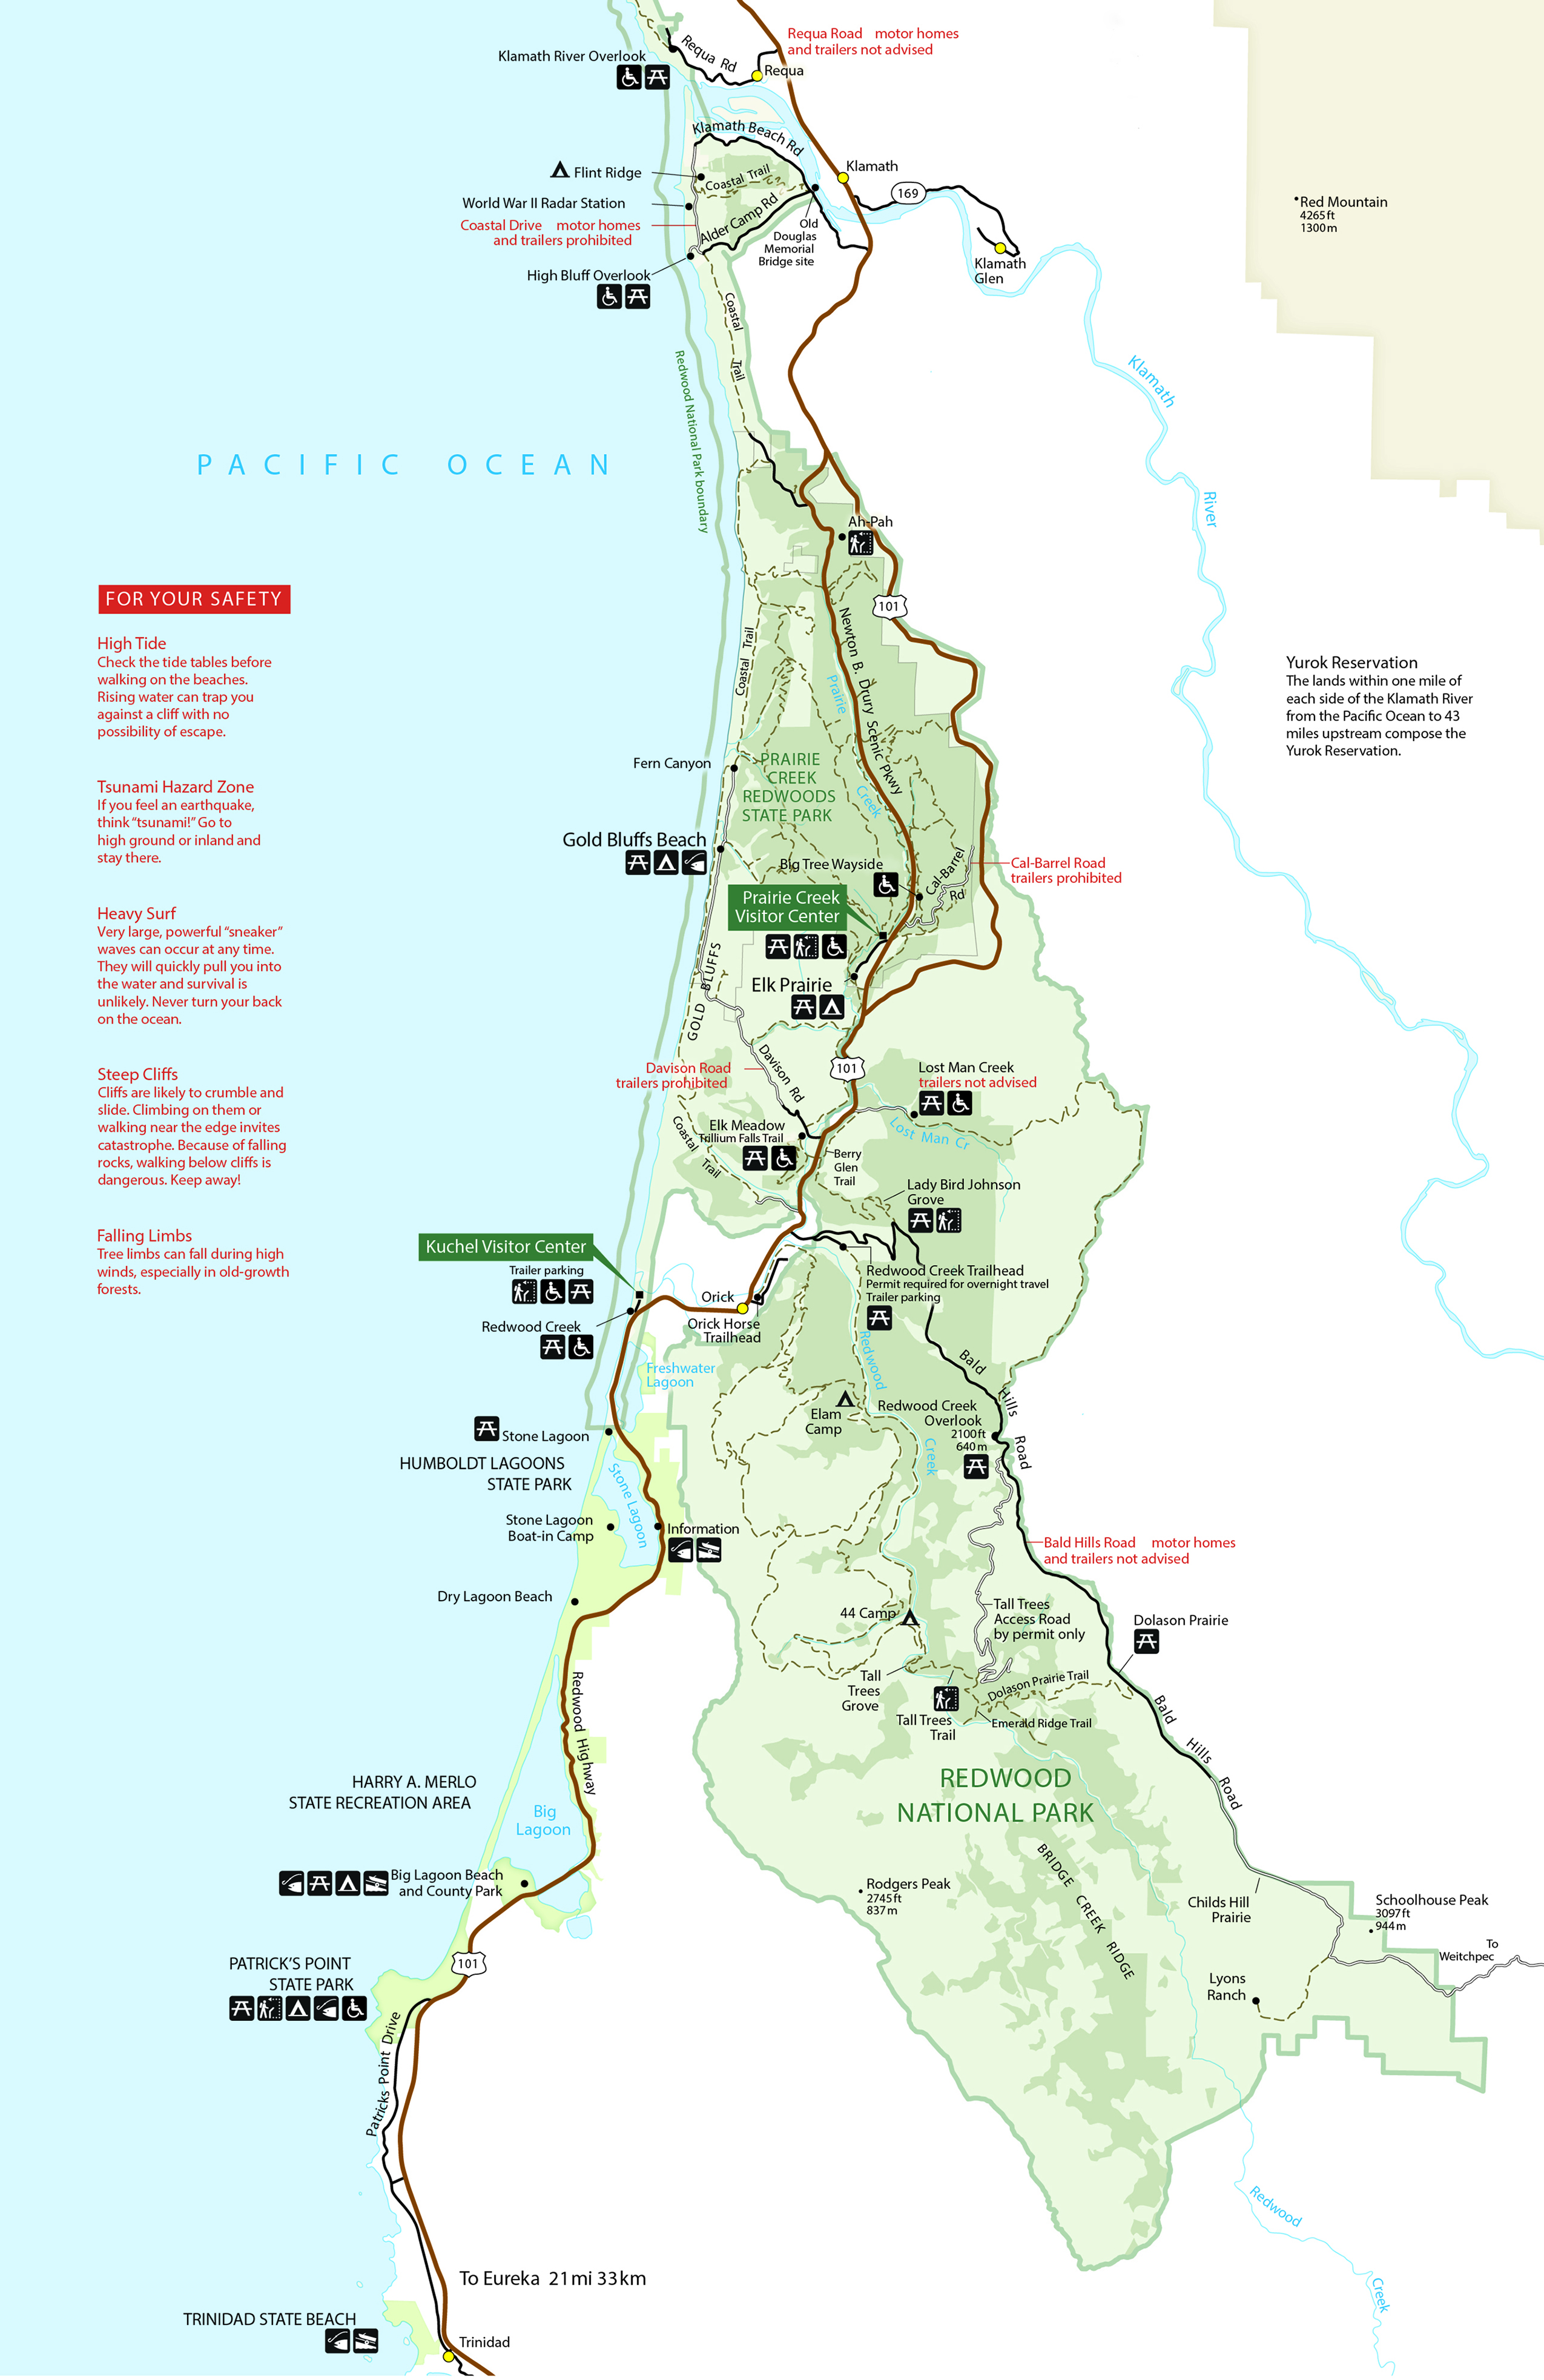 Redwood Trees California Map Maps   Redwood National and State Parks (U.S. National Park Service)